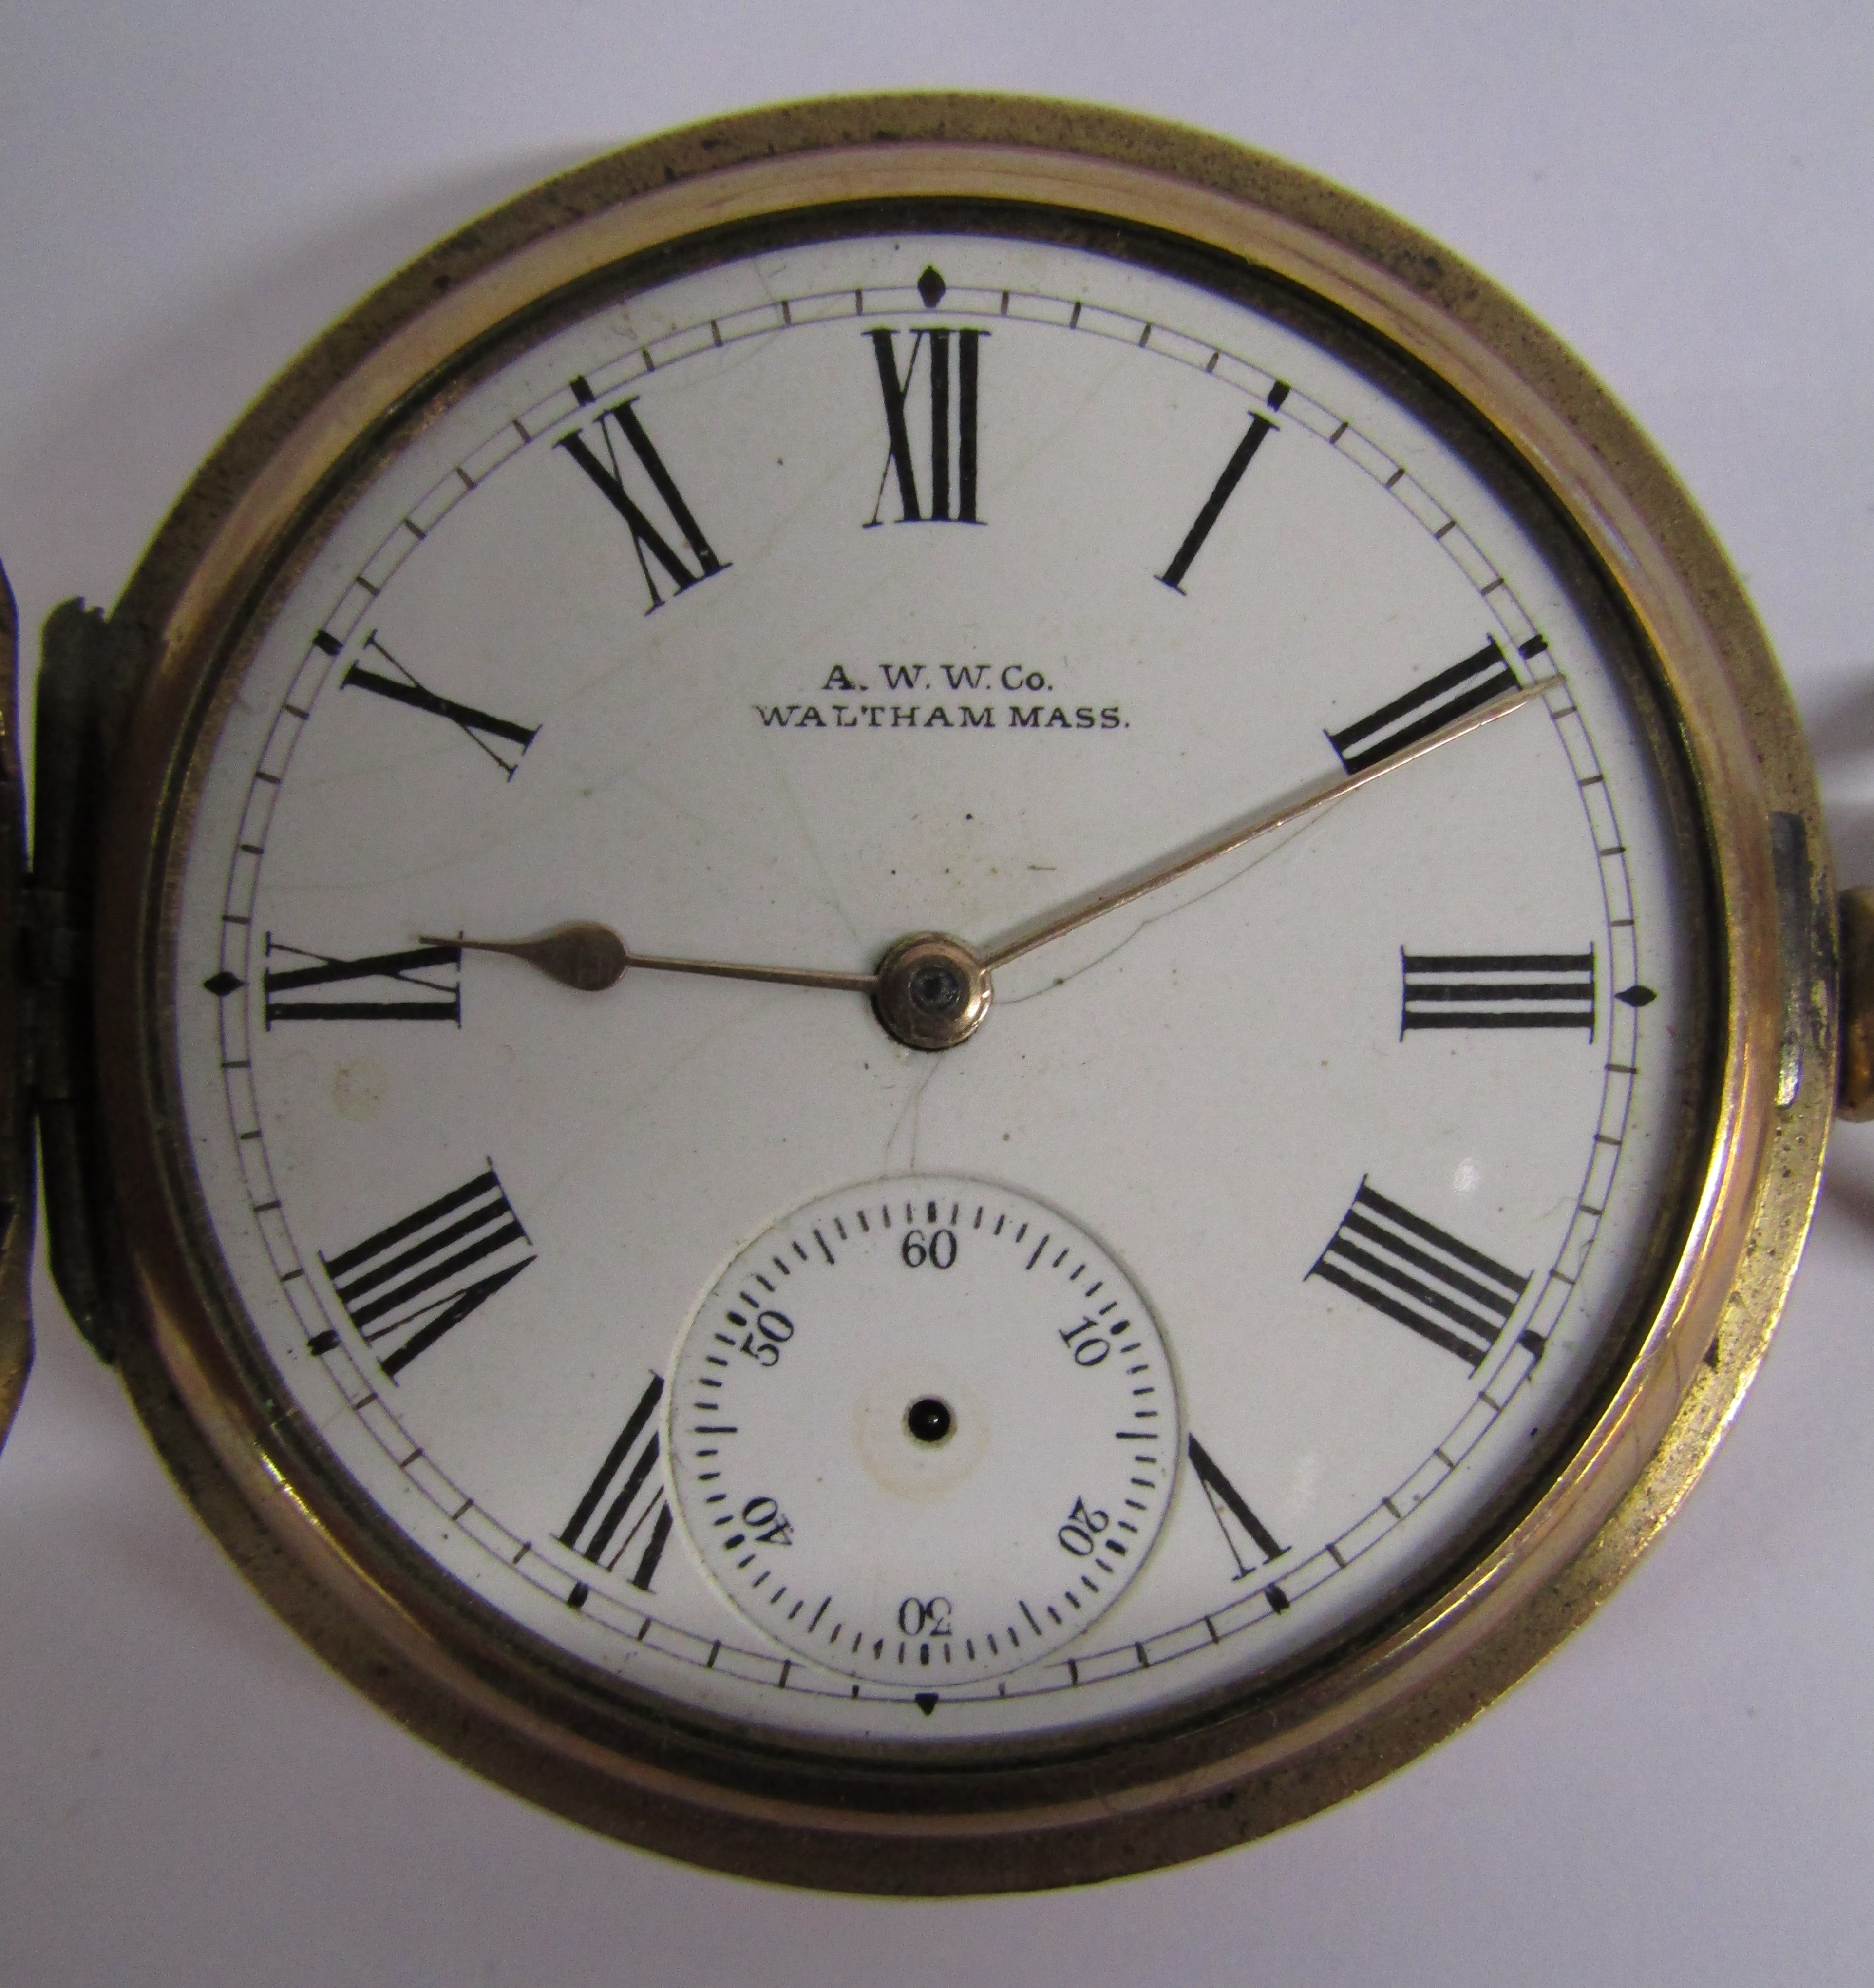 3 pocket watches - A.W.W. Co Waltham Mass gold plated, Thomas Russell & Son Liverpool gold plated - Image 4 of 18